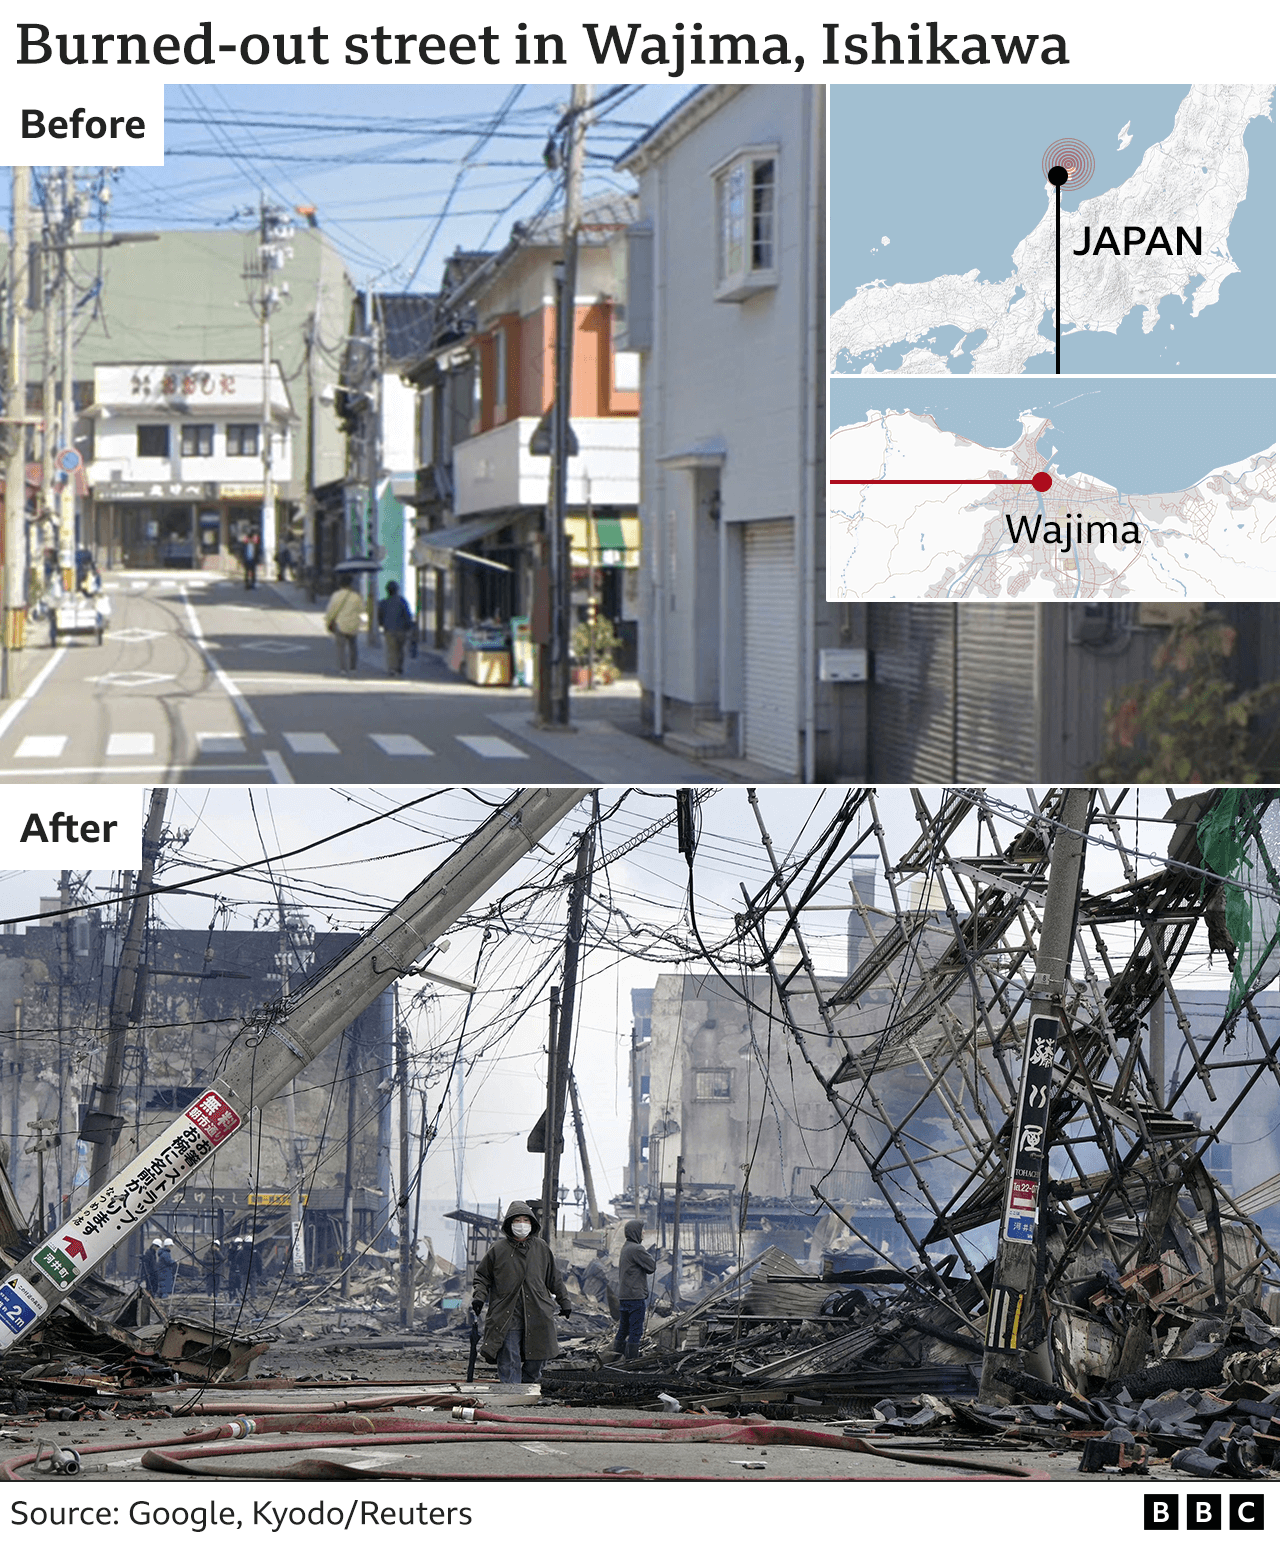 Composite image showing the extensive damage done to a street in Wajima, where commercial and residential properties were destroyed by fire